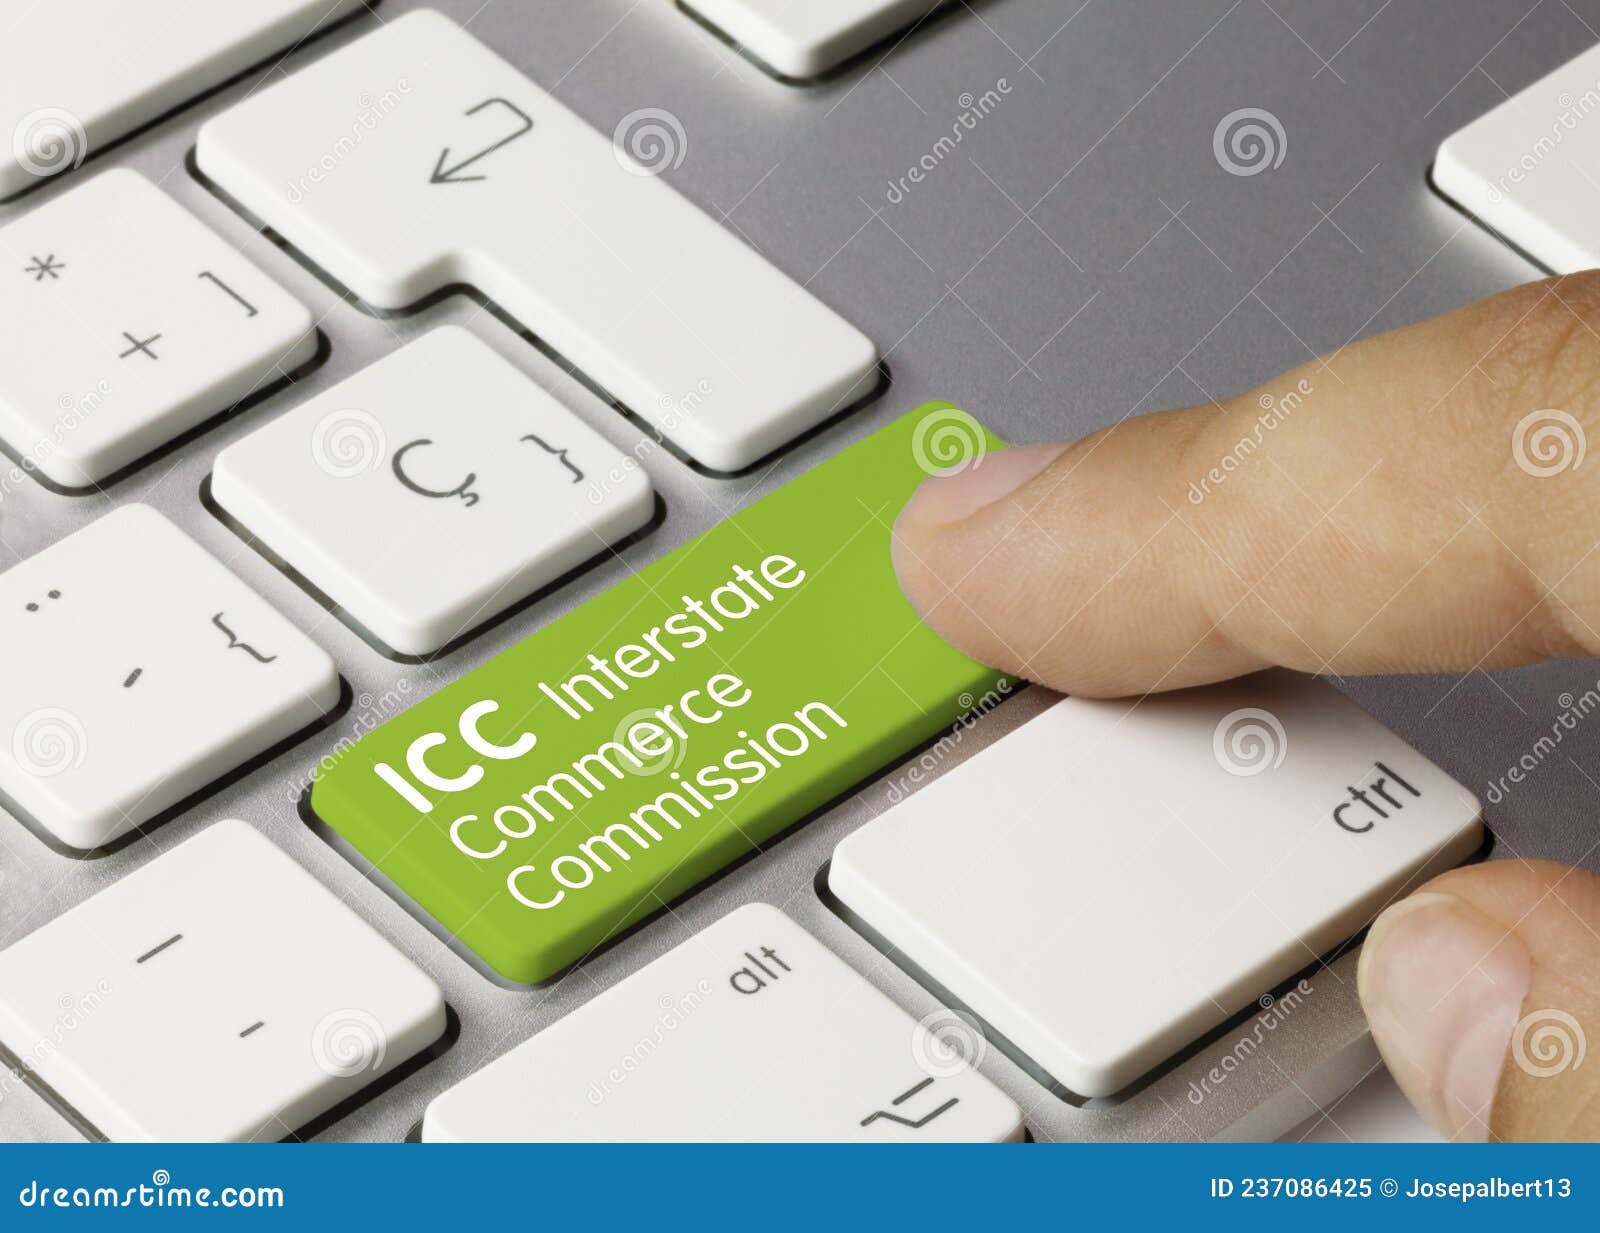 icc interstate commerce commission - inscription on green keyboard key